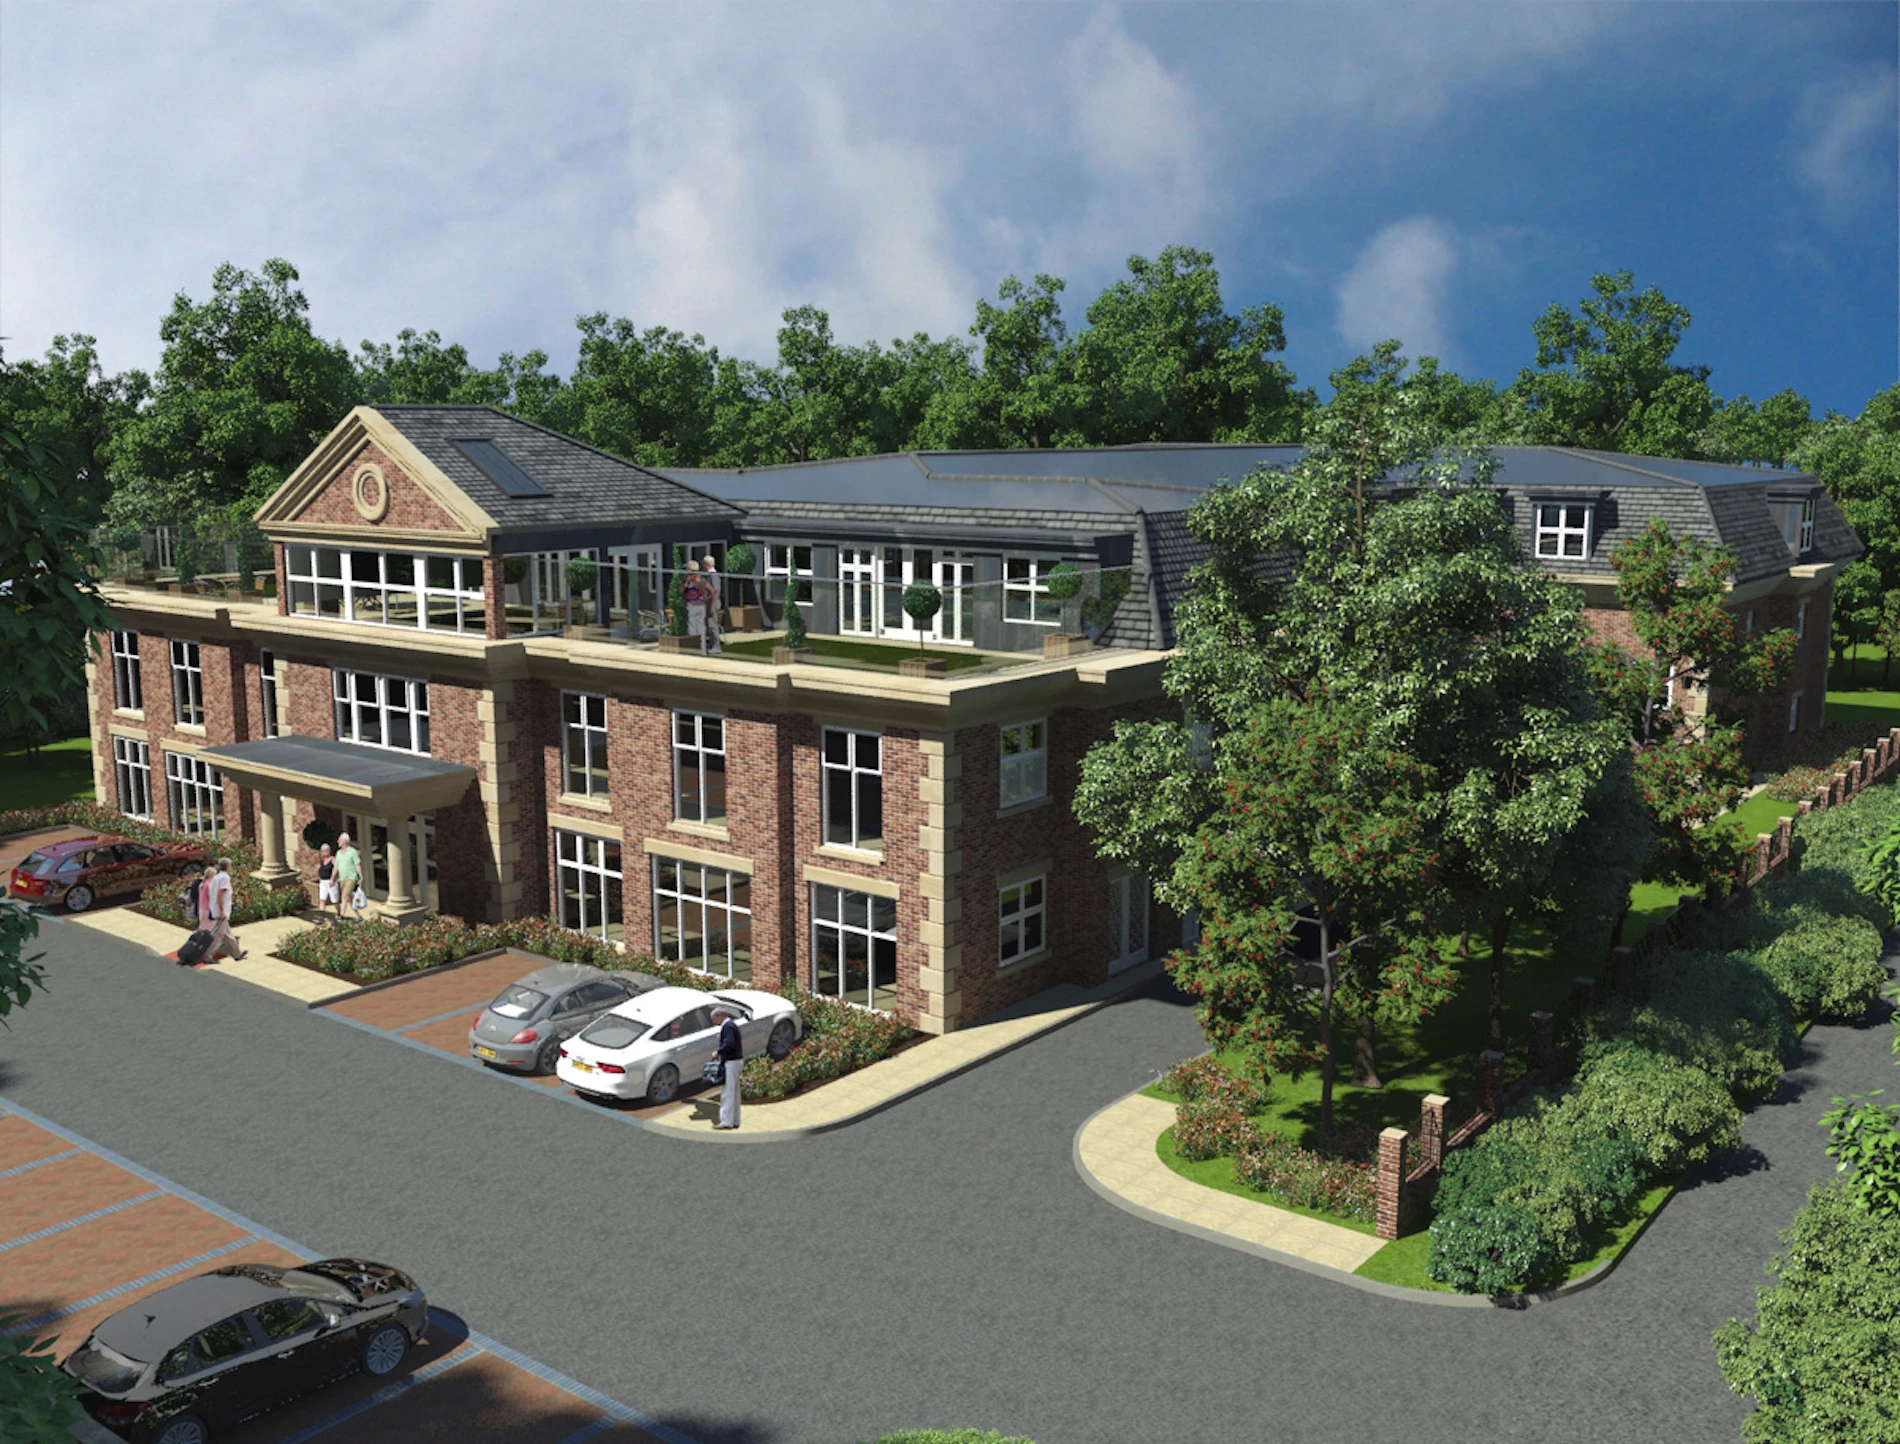 The planned Tranby Park Nursing Home in Hessle.